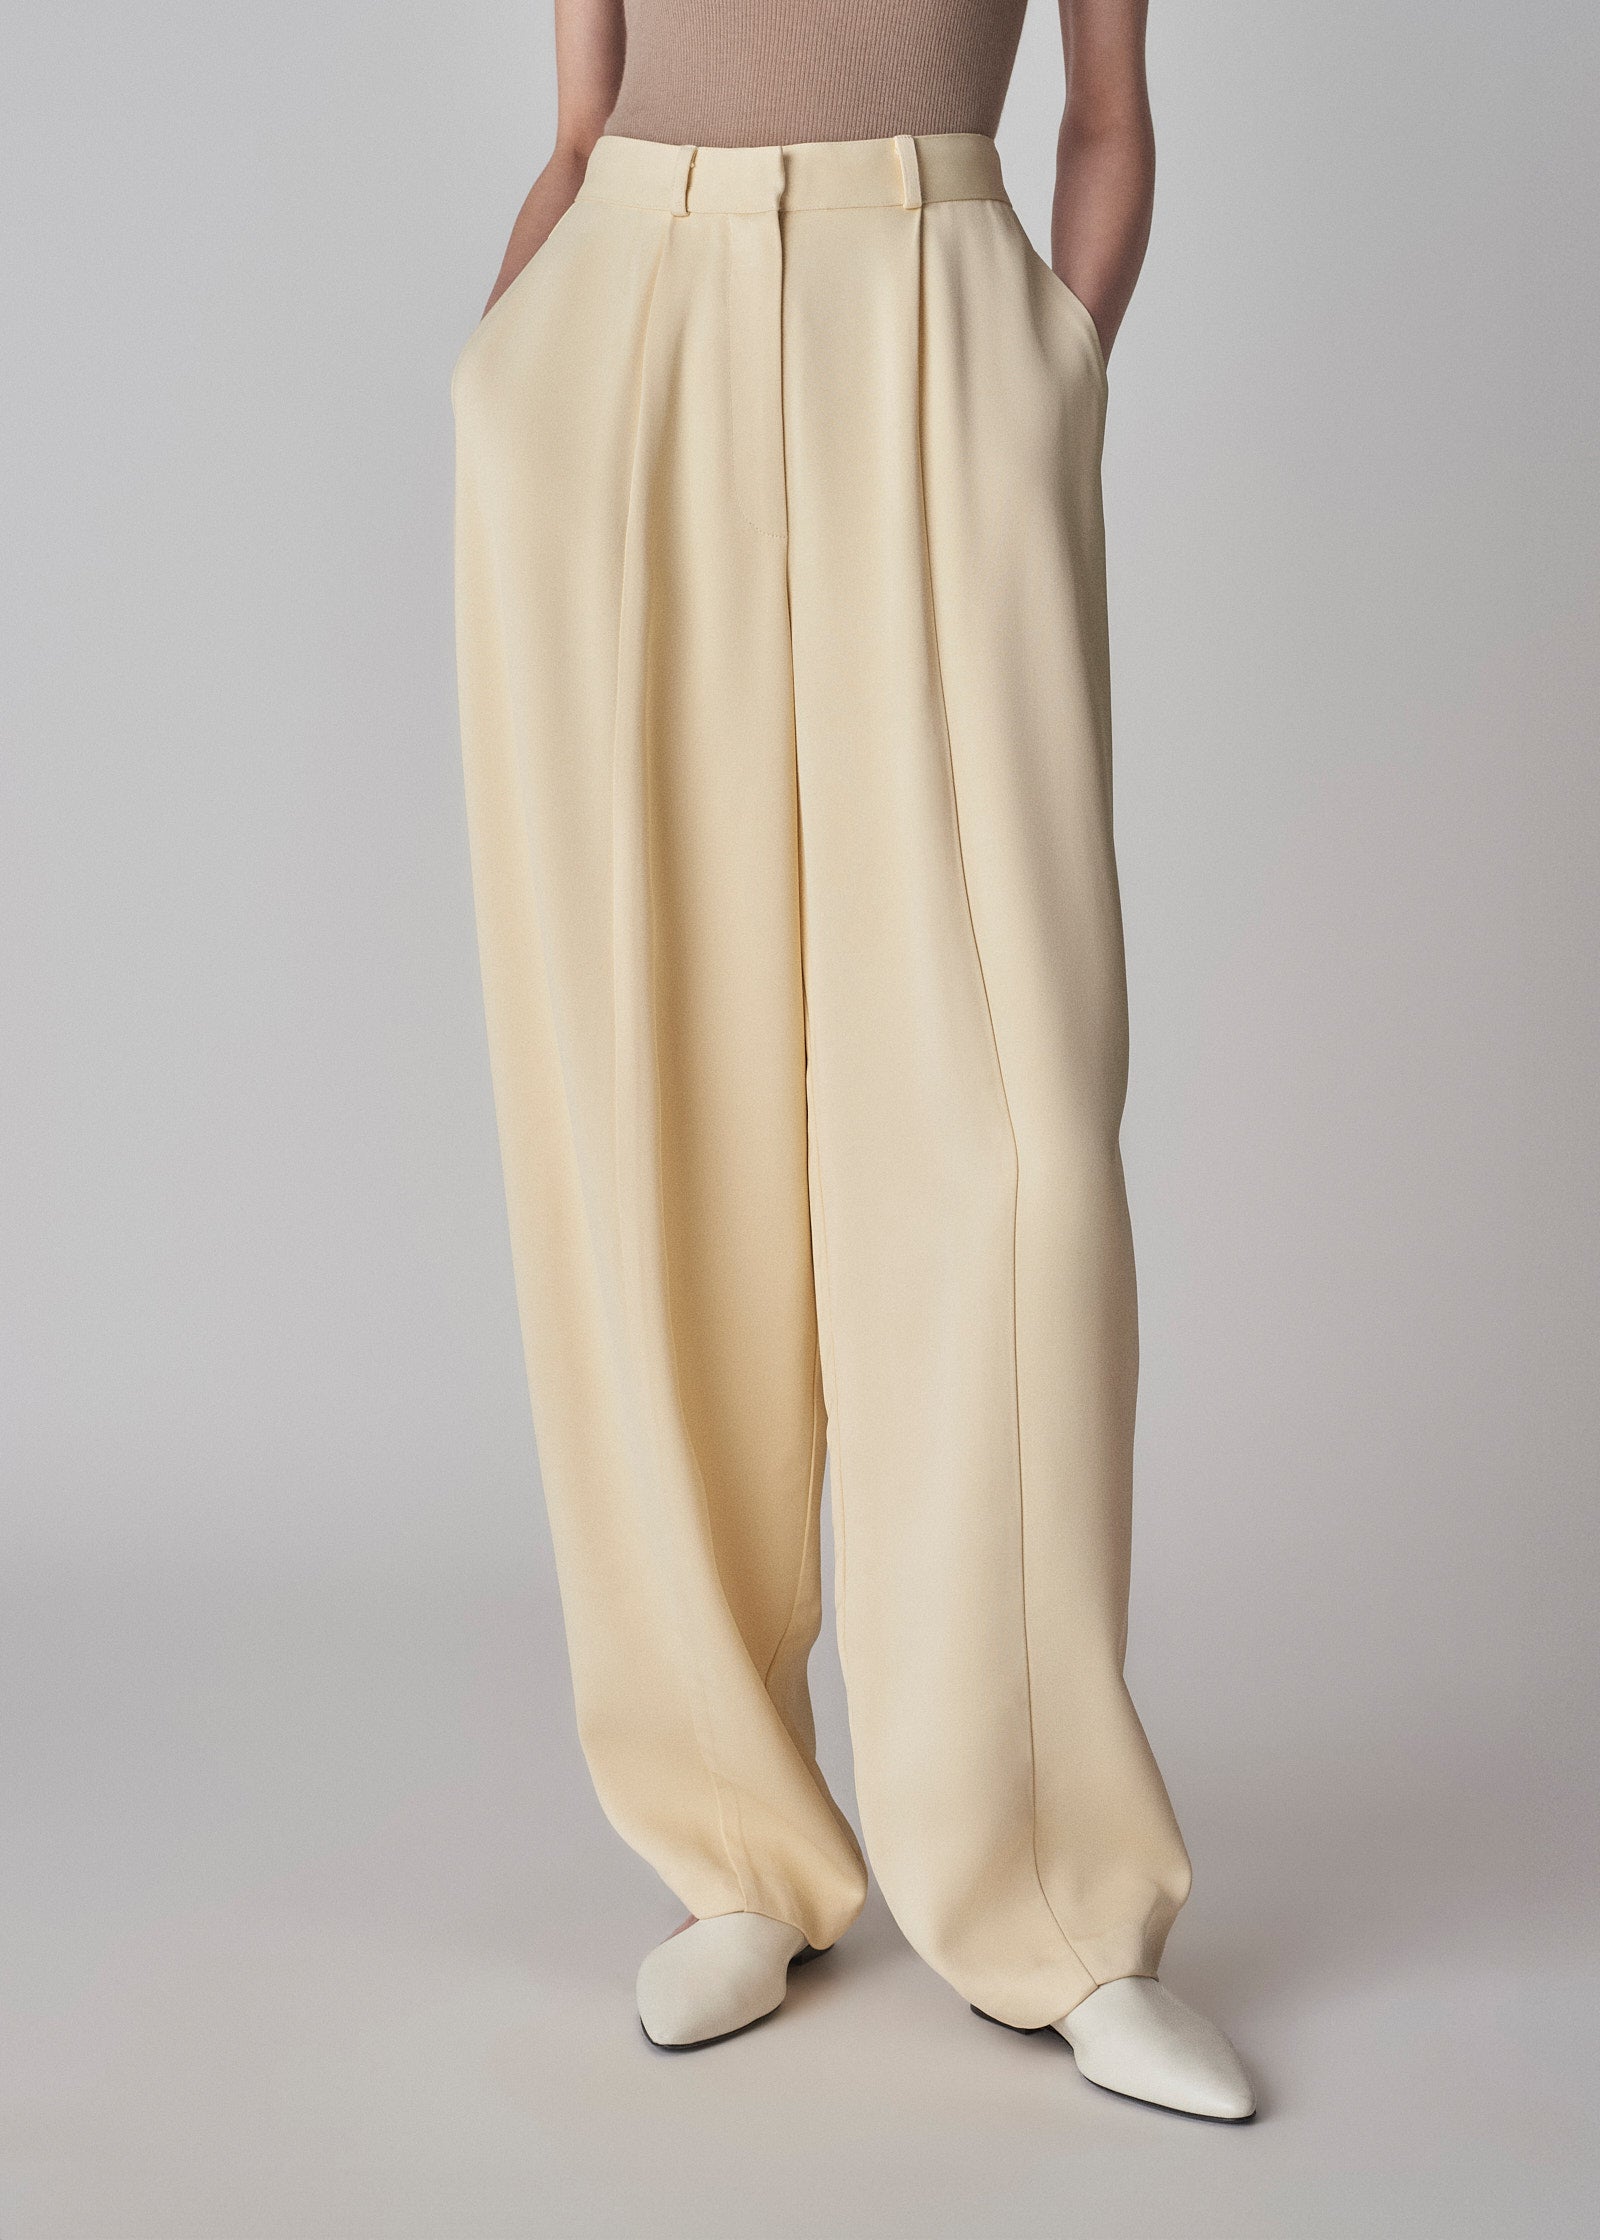 Egg Pant in Satin Crepe - Butter - CO Collections